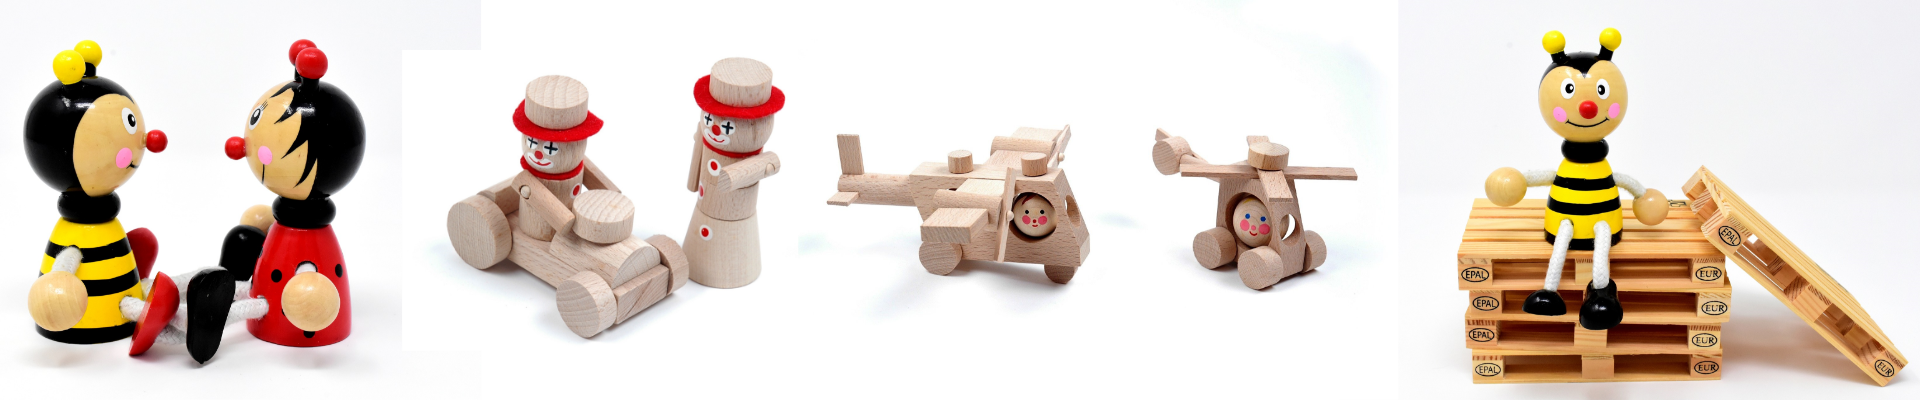 Wooden Toys Printing | Compliant Inks & Pad printing Machines & Automations